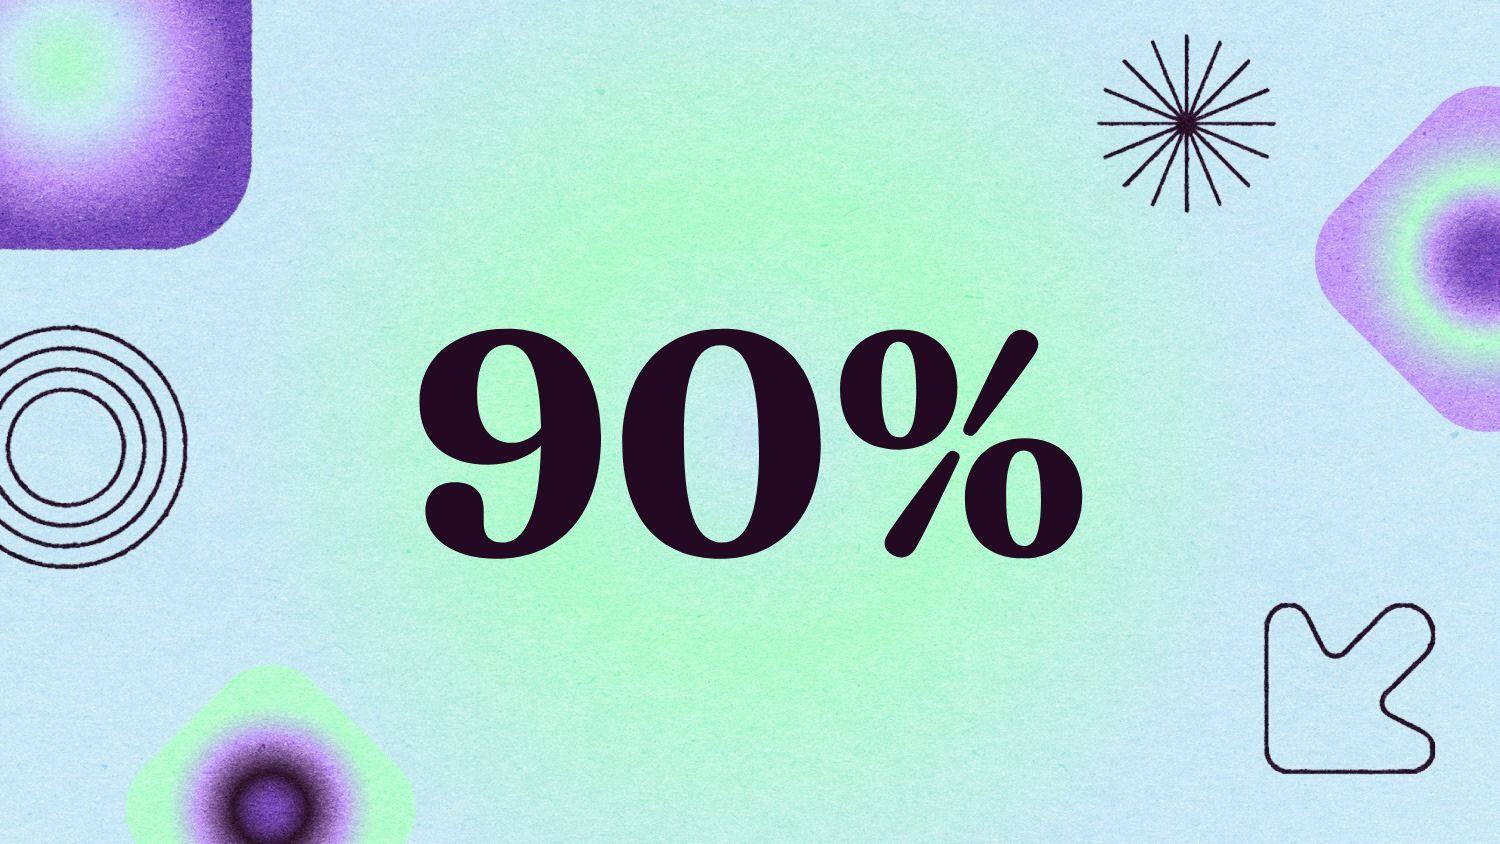 Graphic with the text '90%' 